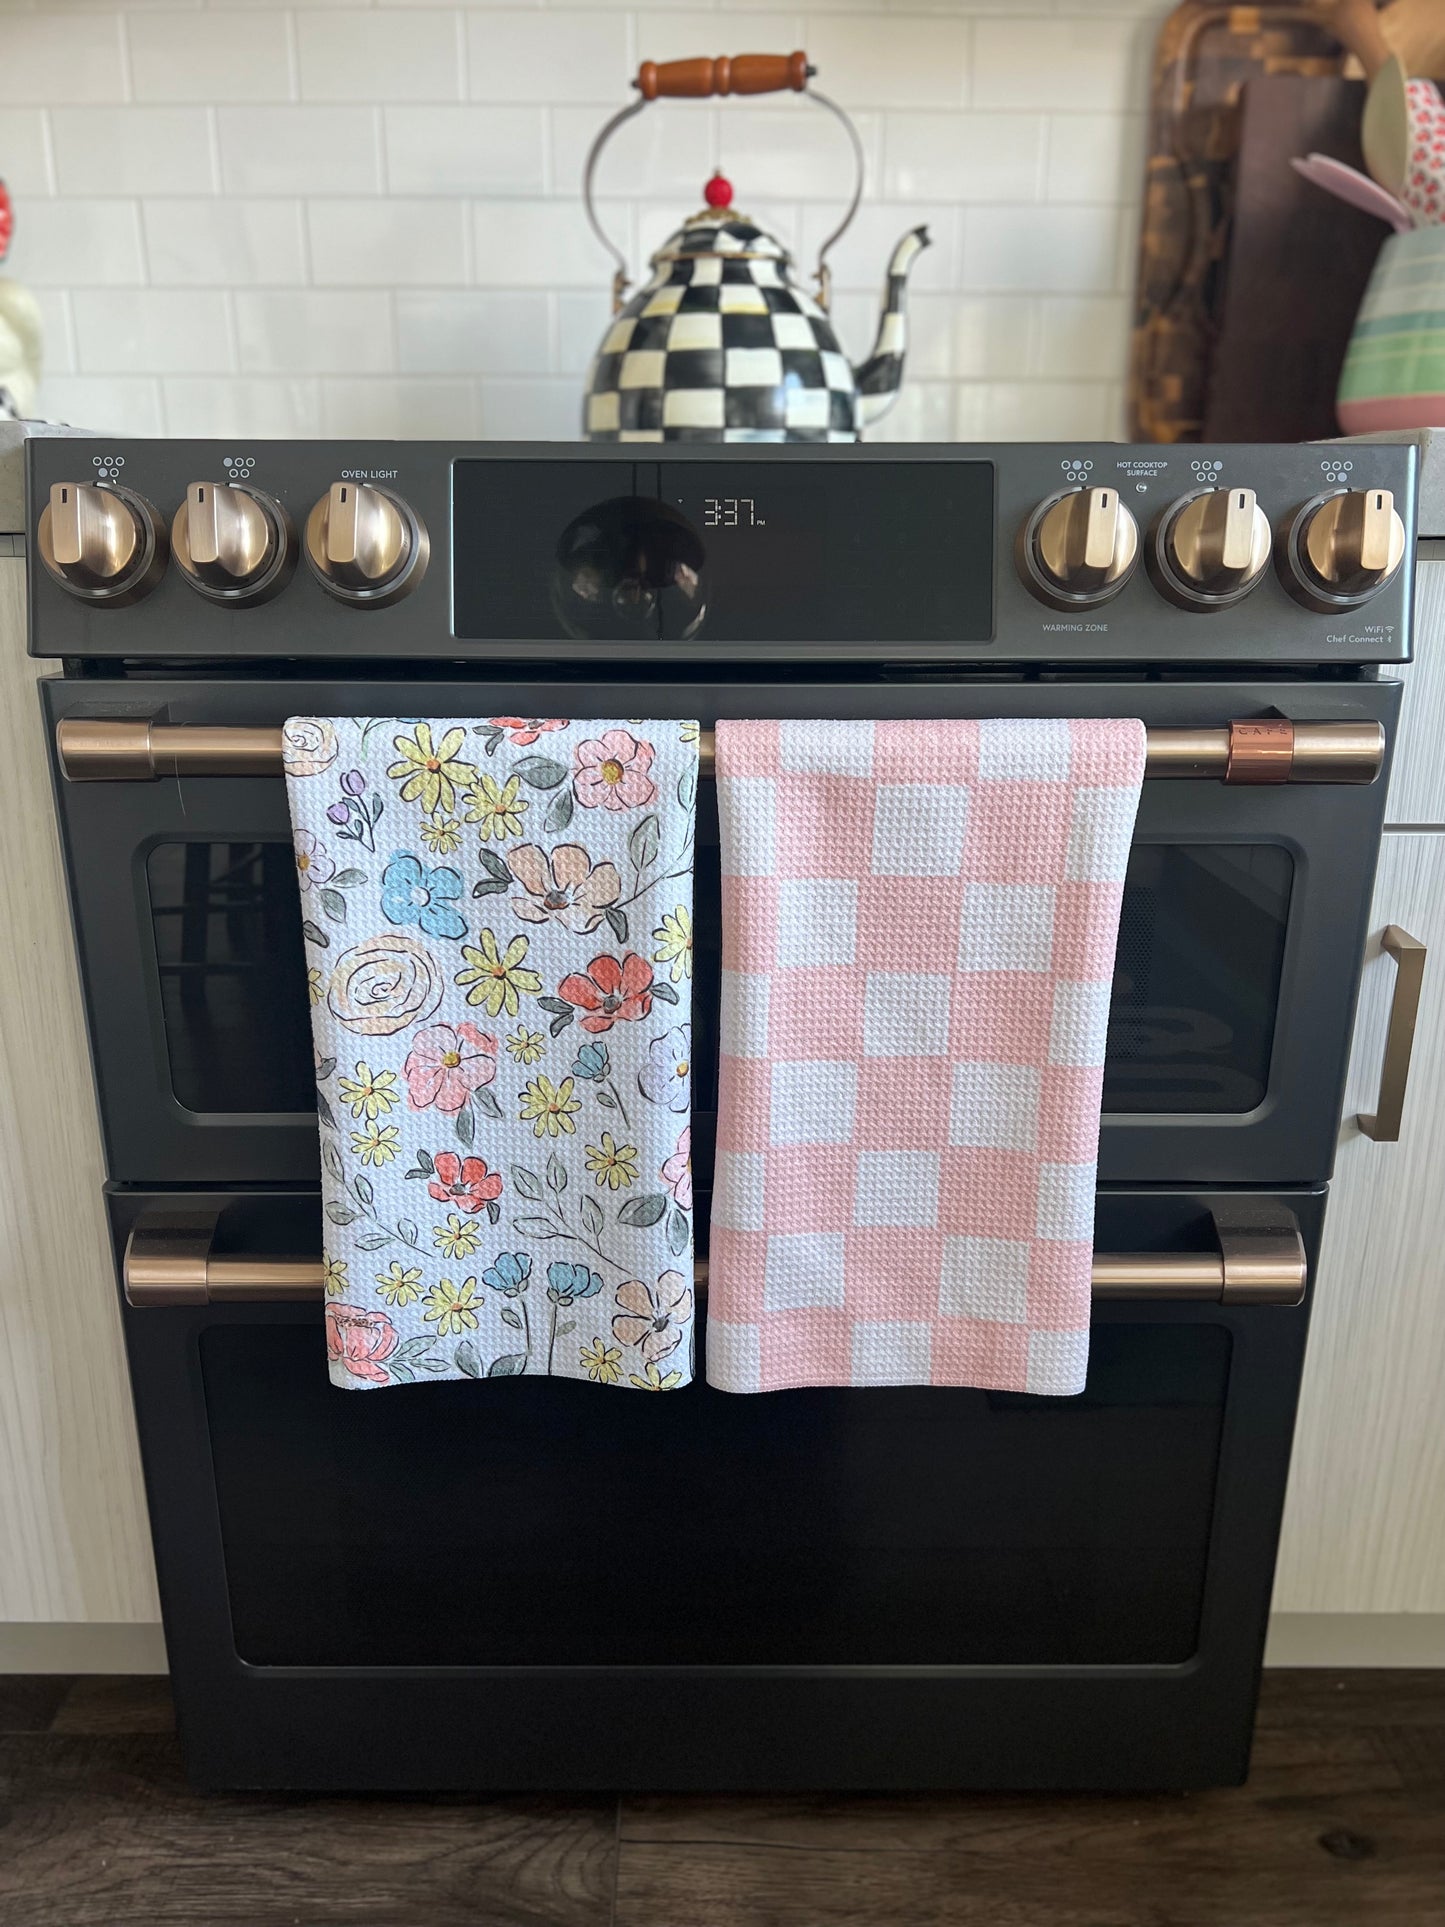 Room for Flowers: Single-Sided Hand Towel